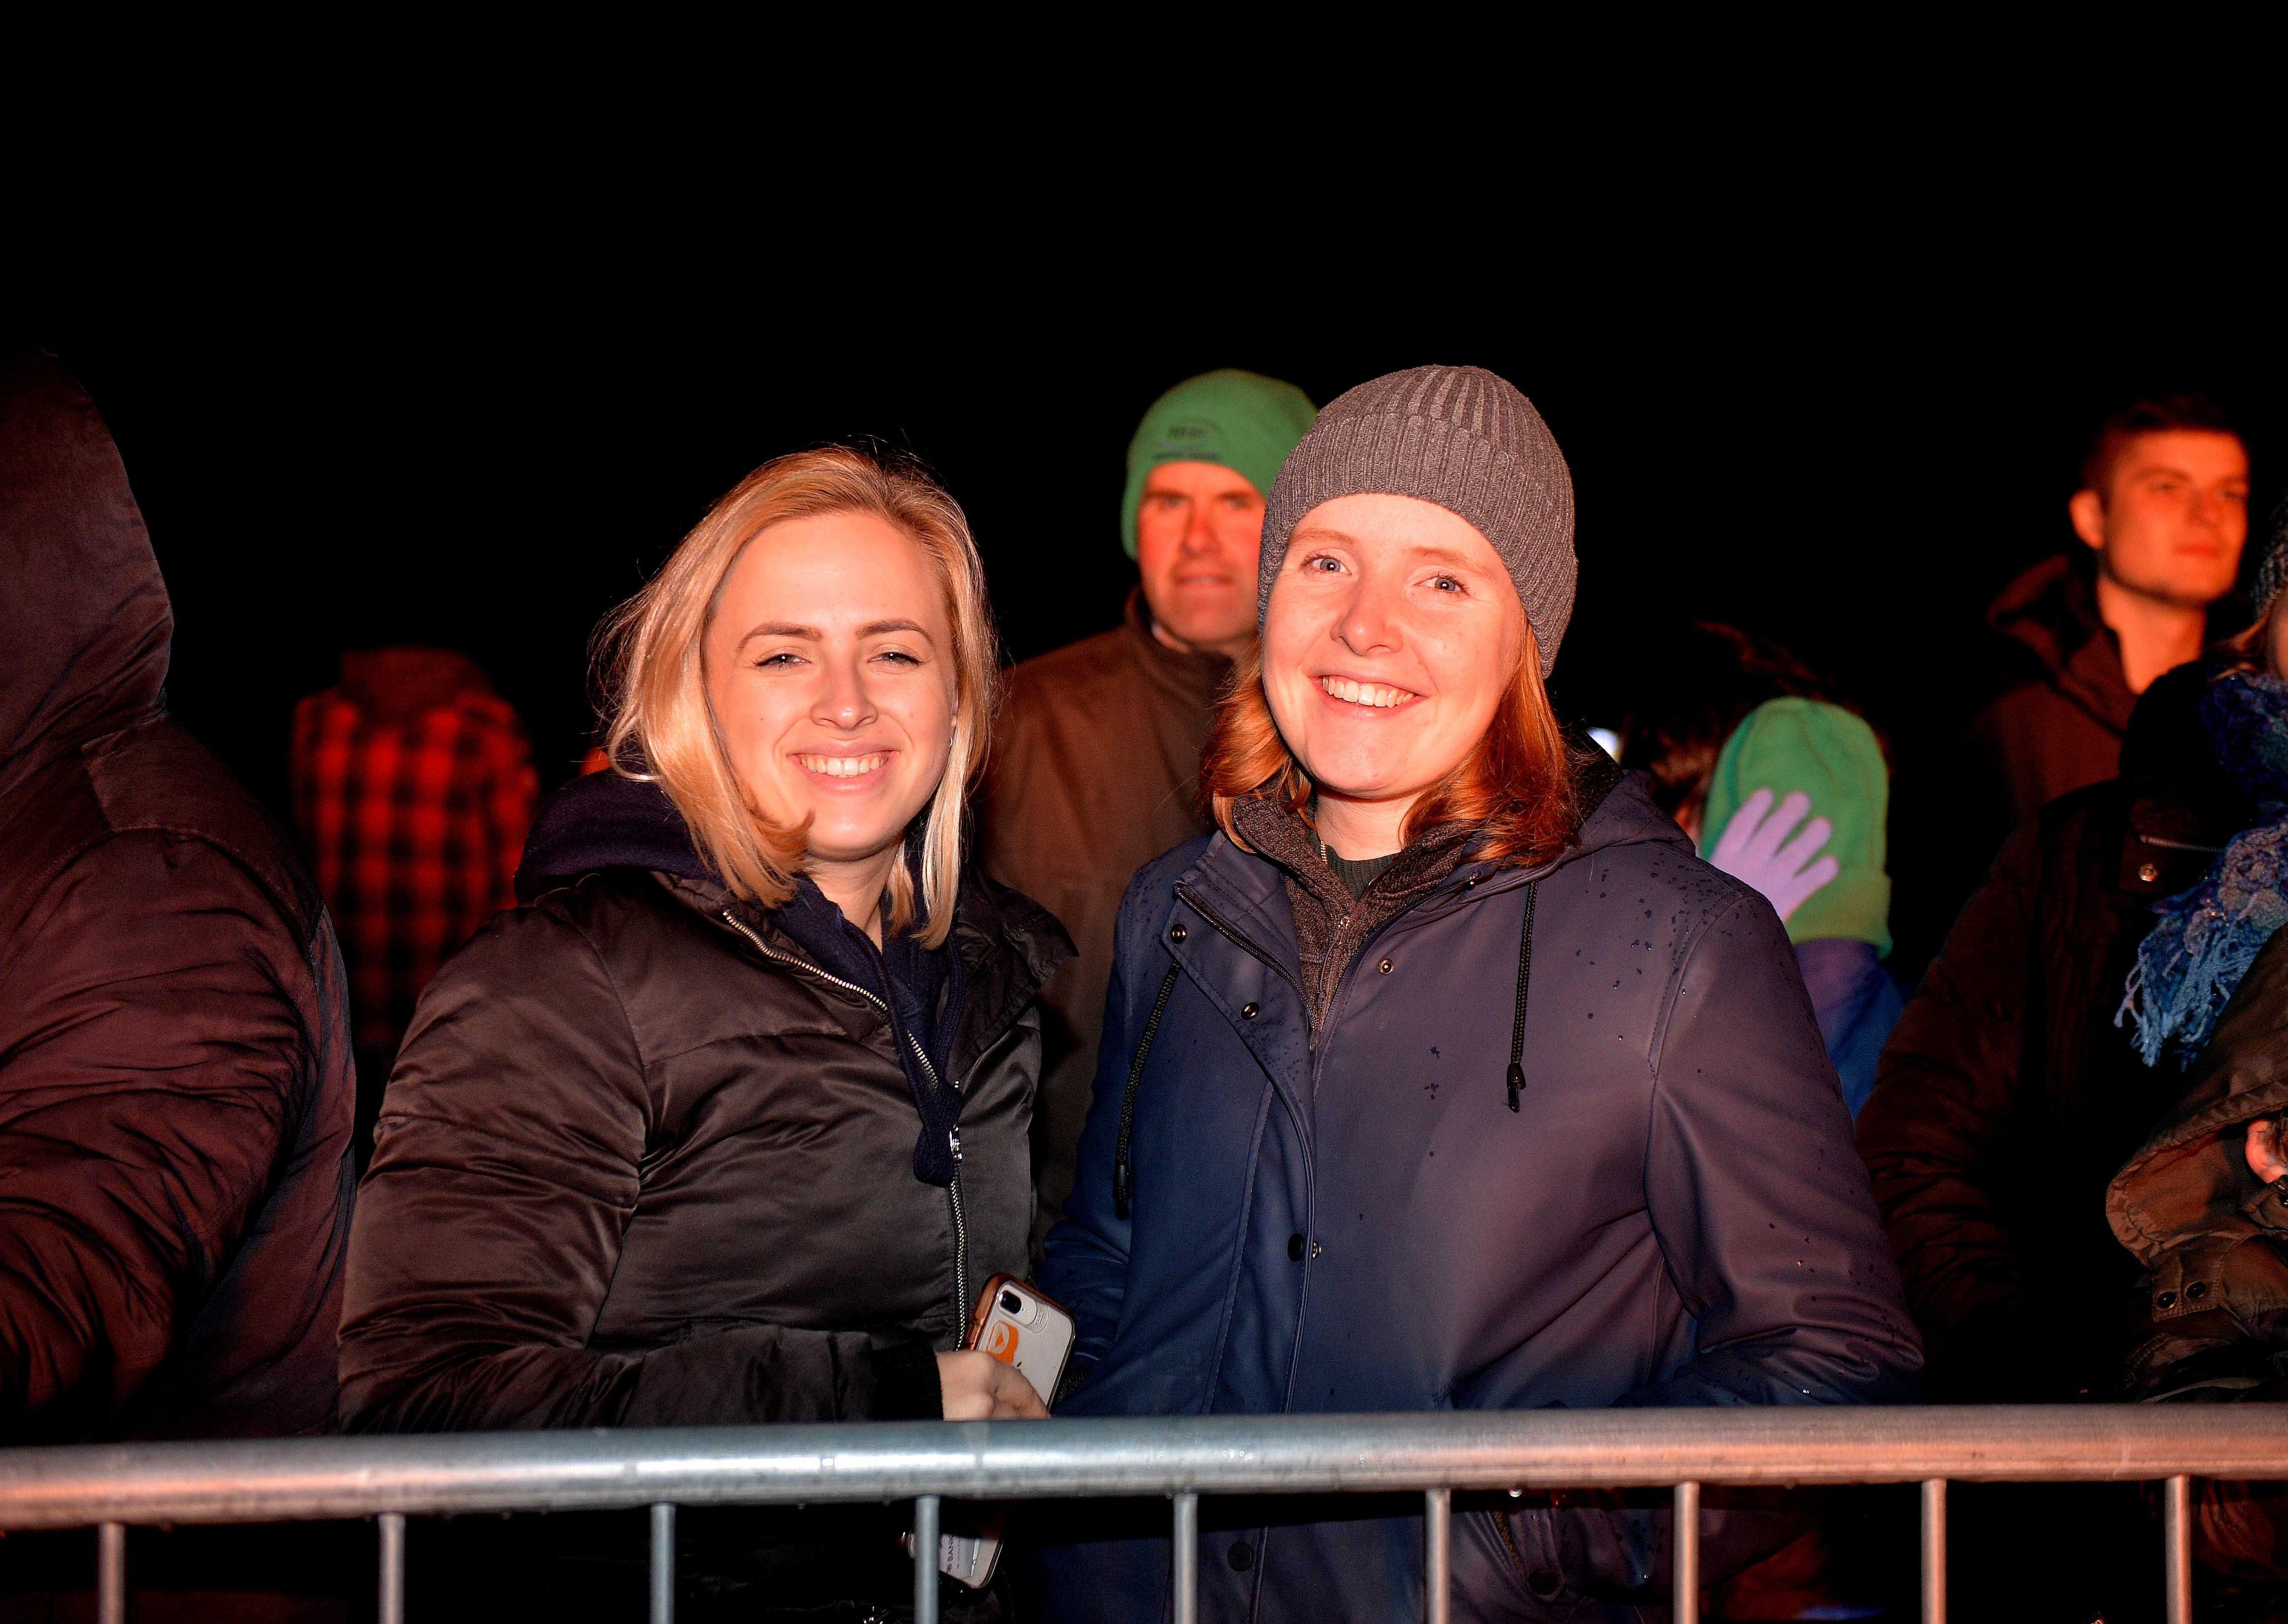 Families enjoy the fireworks display at the Borders Events Centre in Kelso.